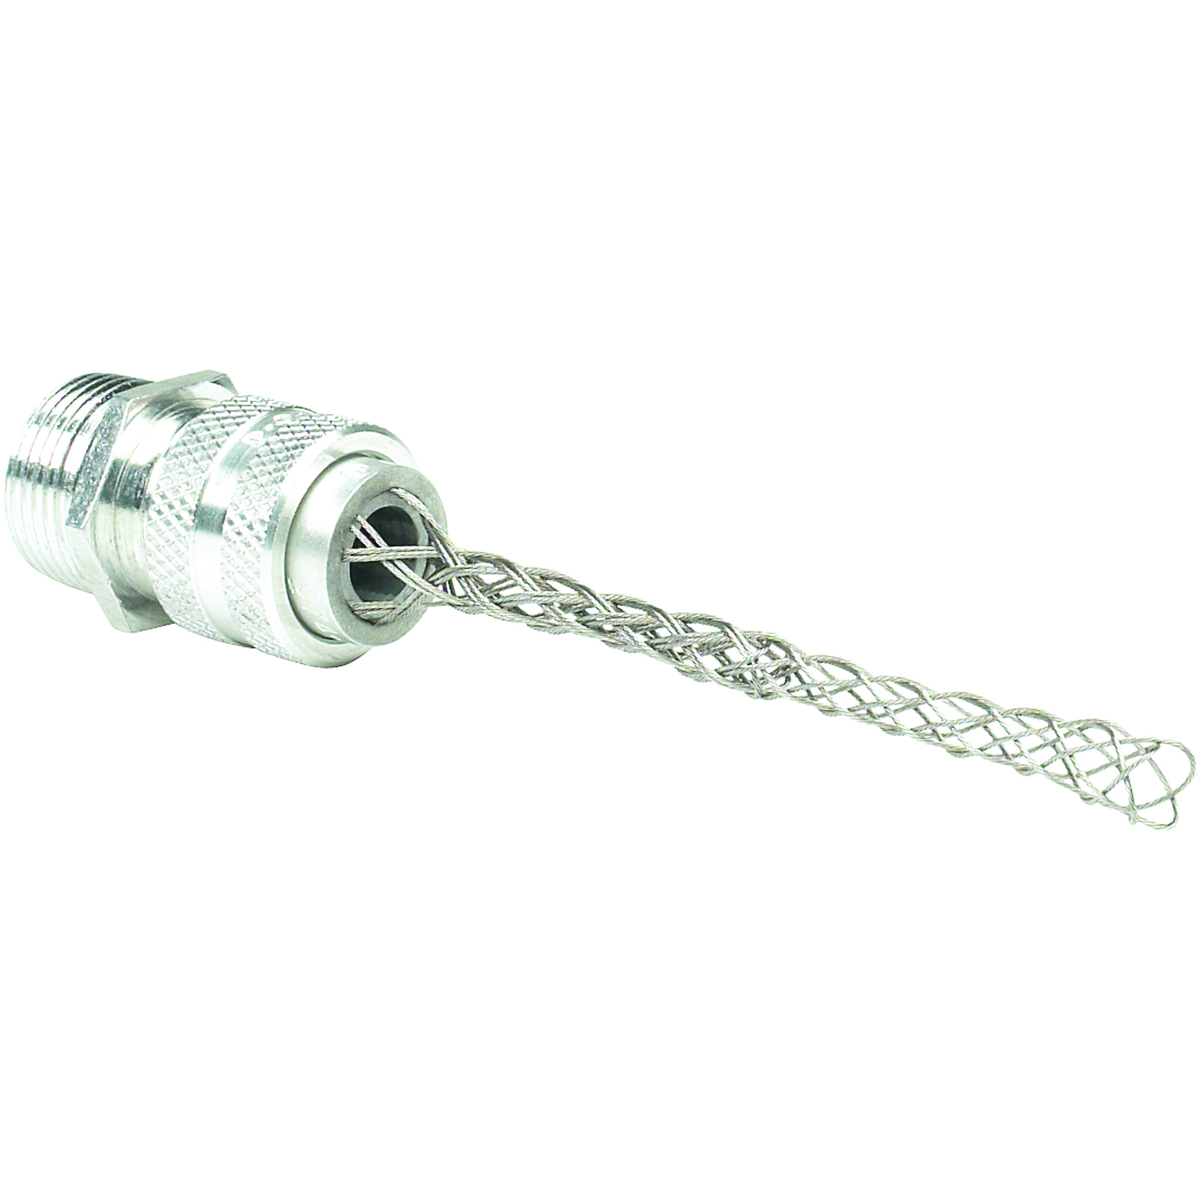 Z SERIES FITTINGS - ALUMINUM CORD CONNECTOR WITH MESH GRIP - Z CORDCONNECTOR - STRAIGHT - NPT SIZE 3/4 IN - WHITE